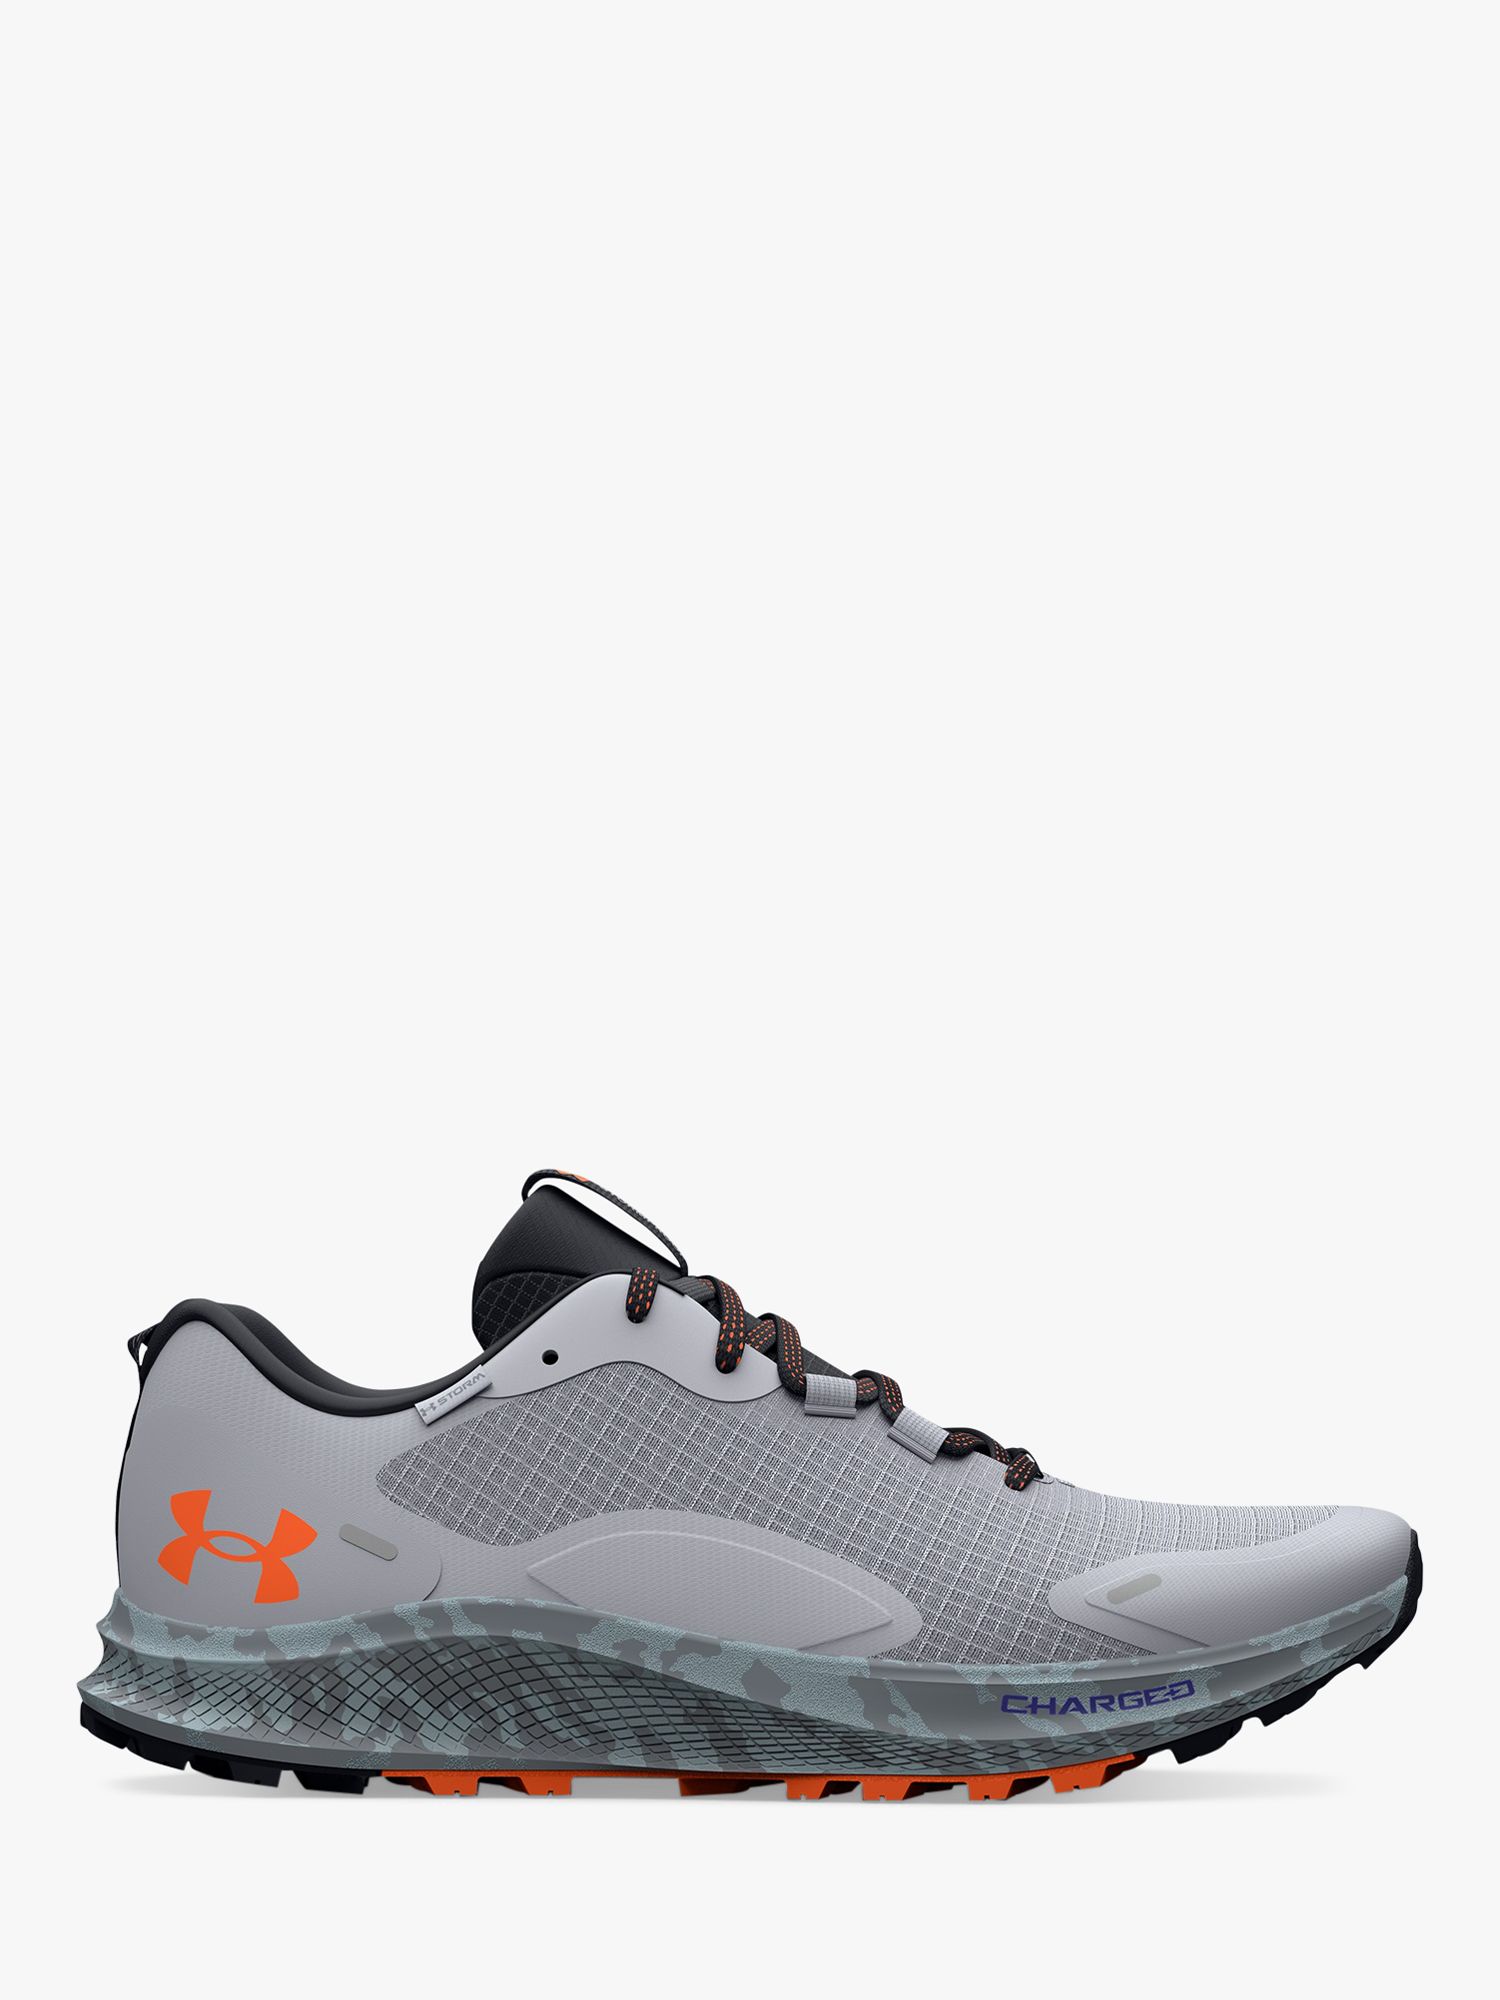 Under Armour Charged Bandit 2 Trail Running Shoes, Mod Grey/Black at & Partners